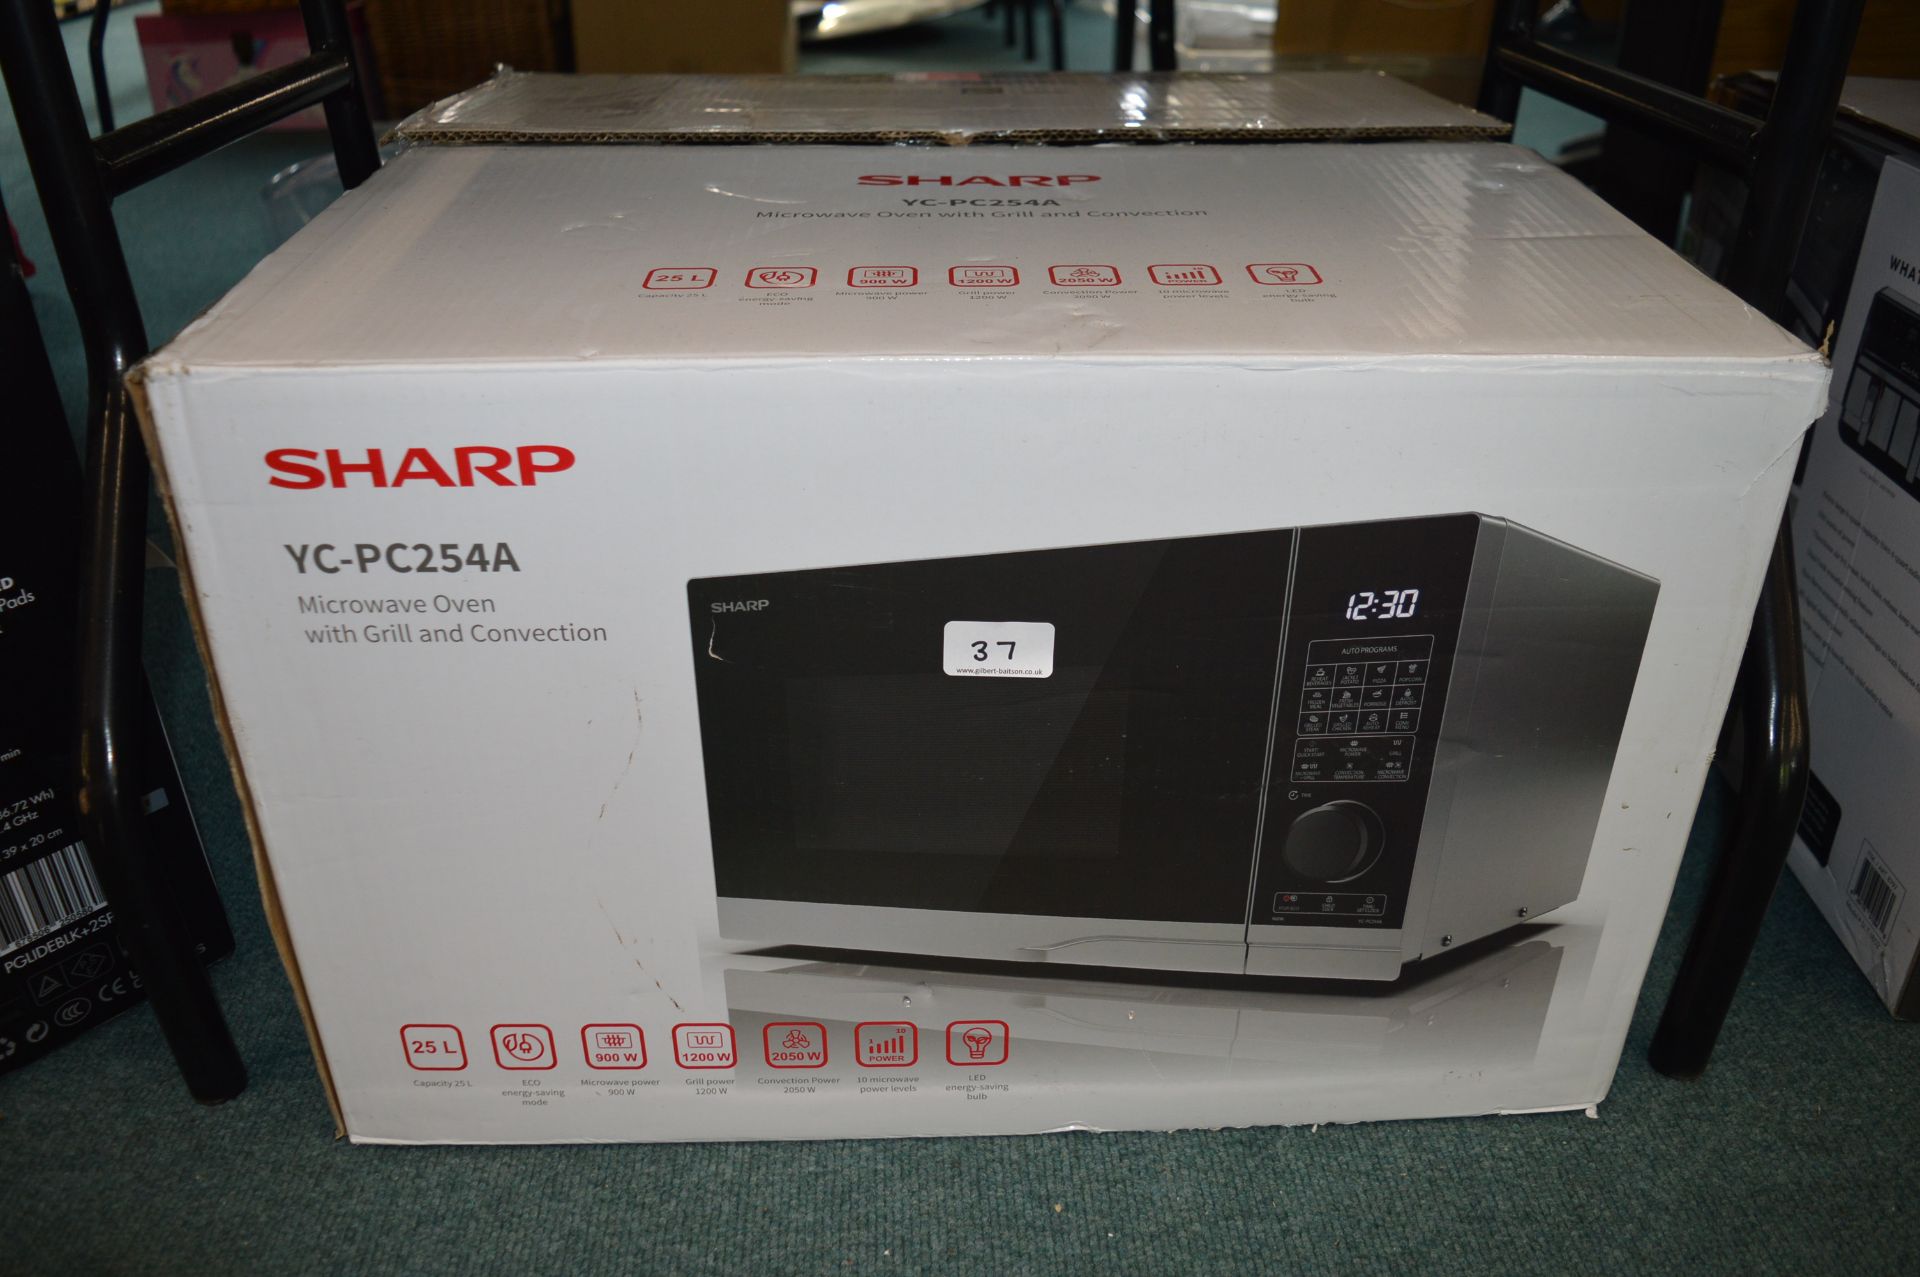 *Sharp YC-PC254A Grill/Convection/Microwave Oven